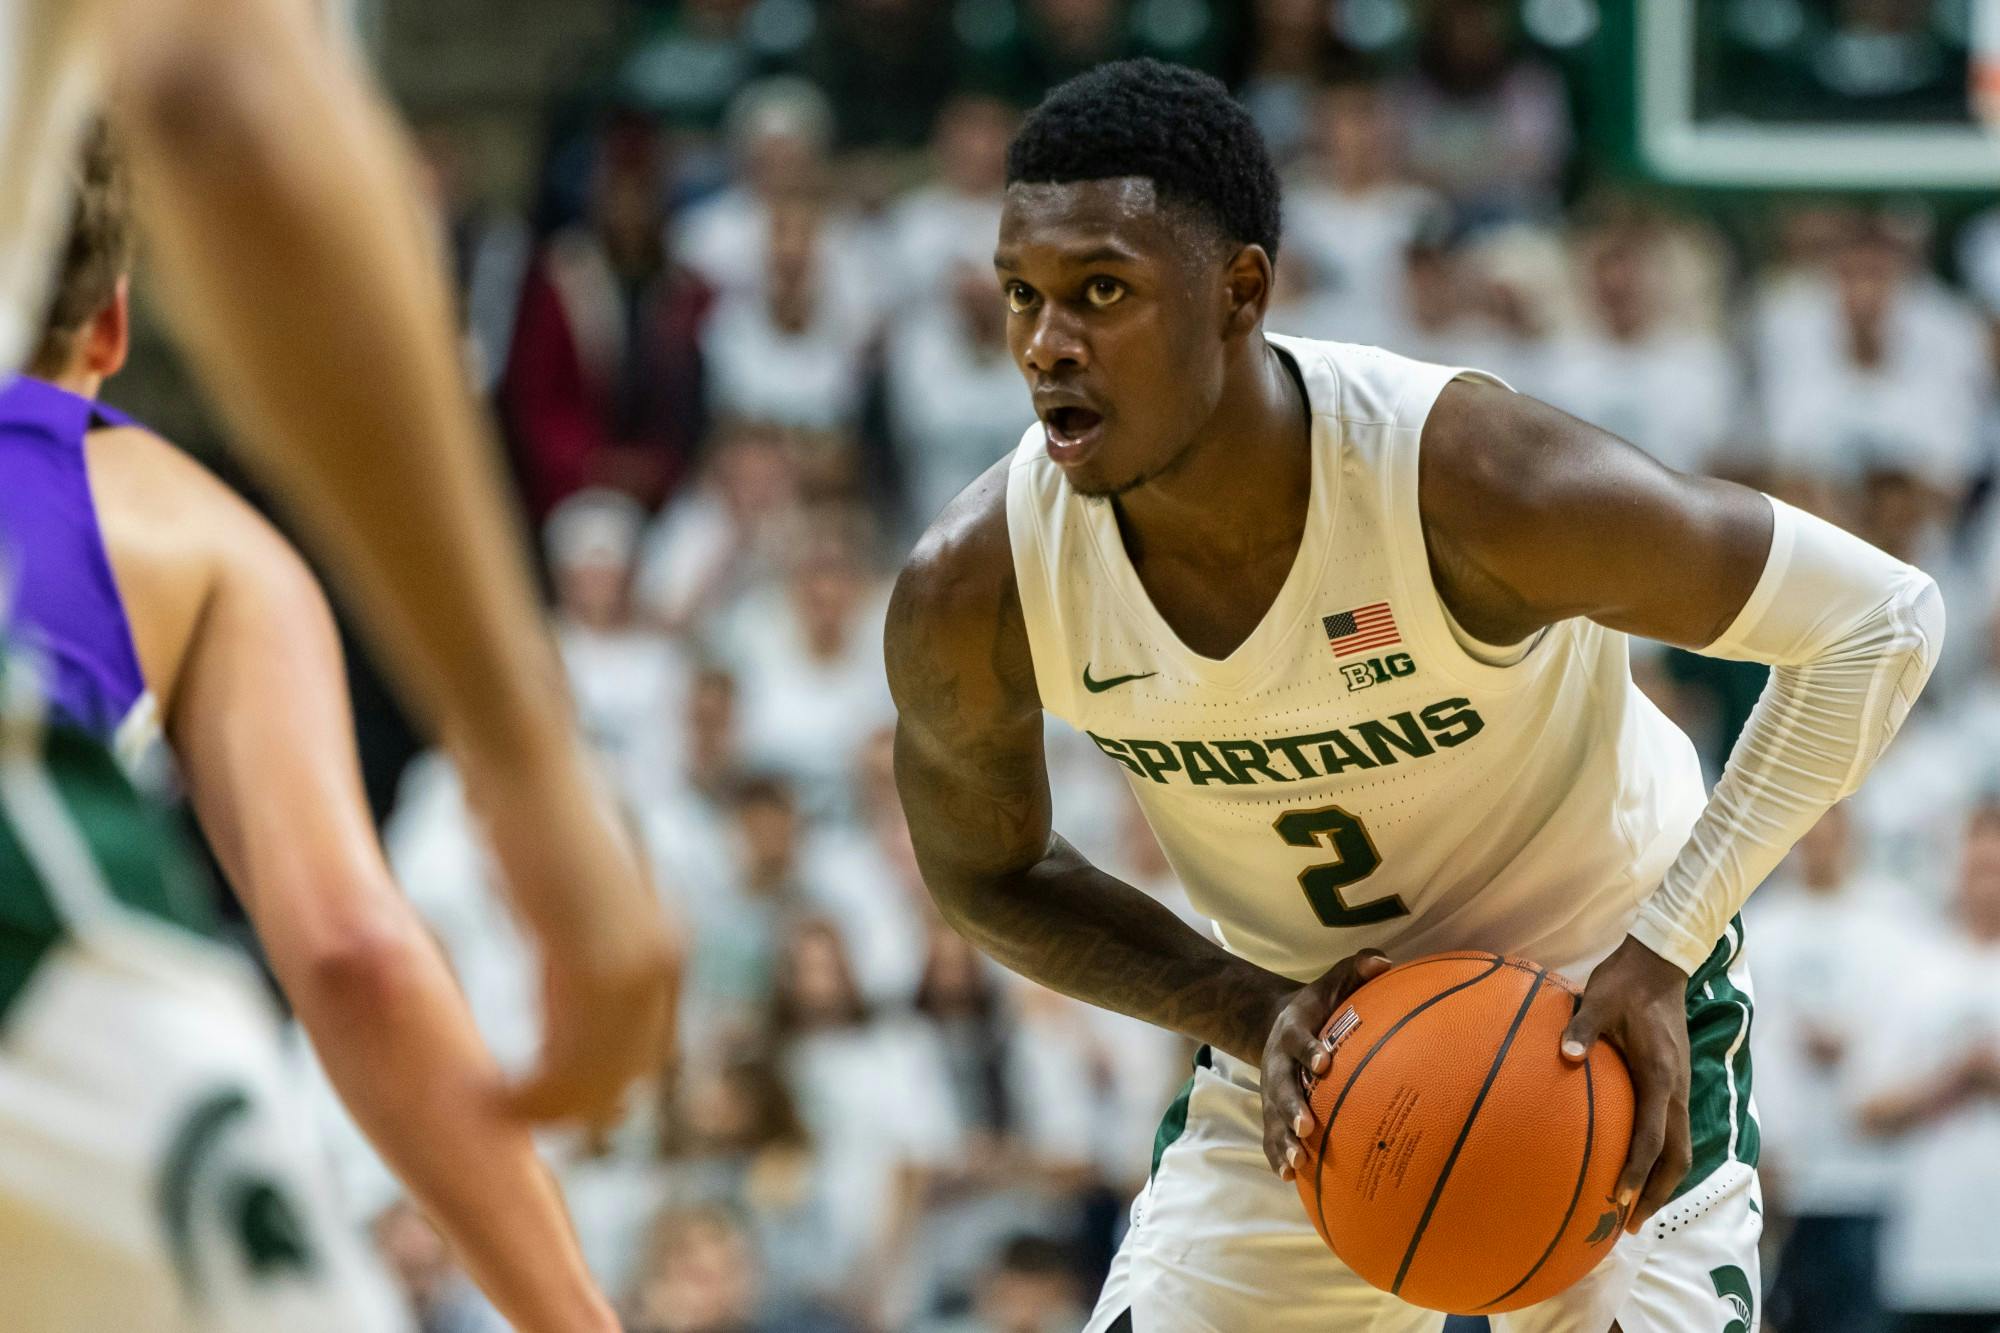 <p>Freshman guard Rocket Watts eyes up the Albion defense. The Spartans lead the Britons, 40-25, at half on Oct. 29, 2019 at the Breslin Student Events Center.</p>